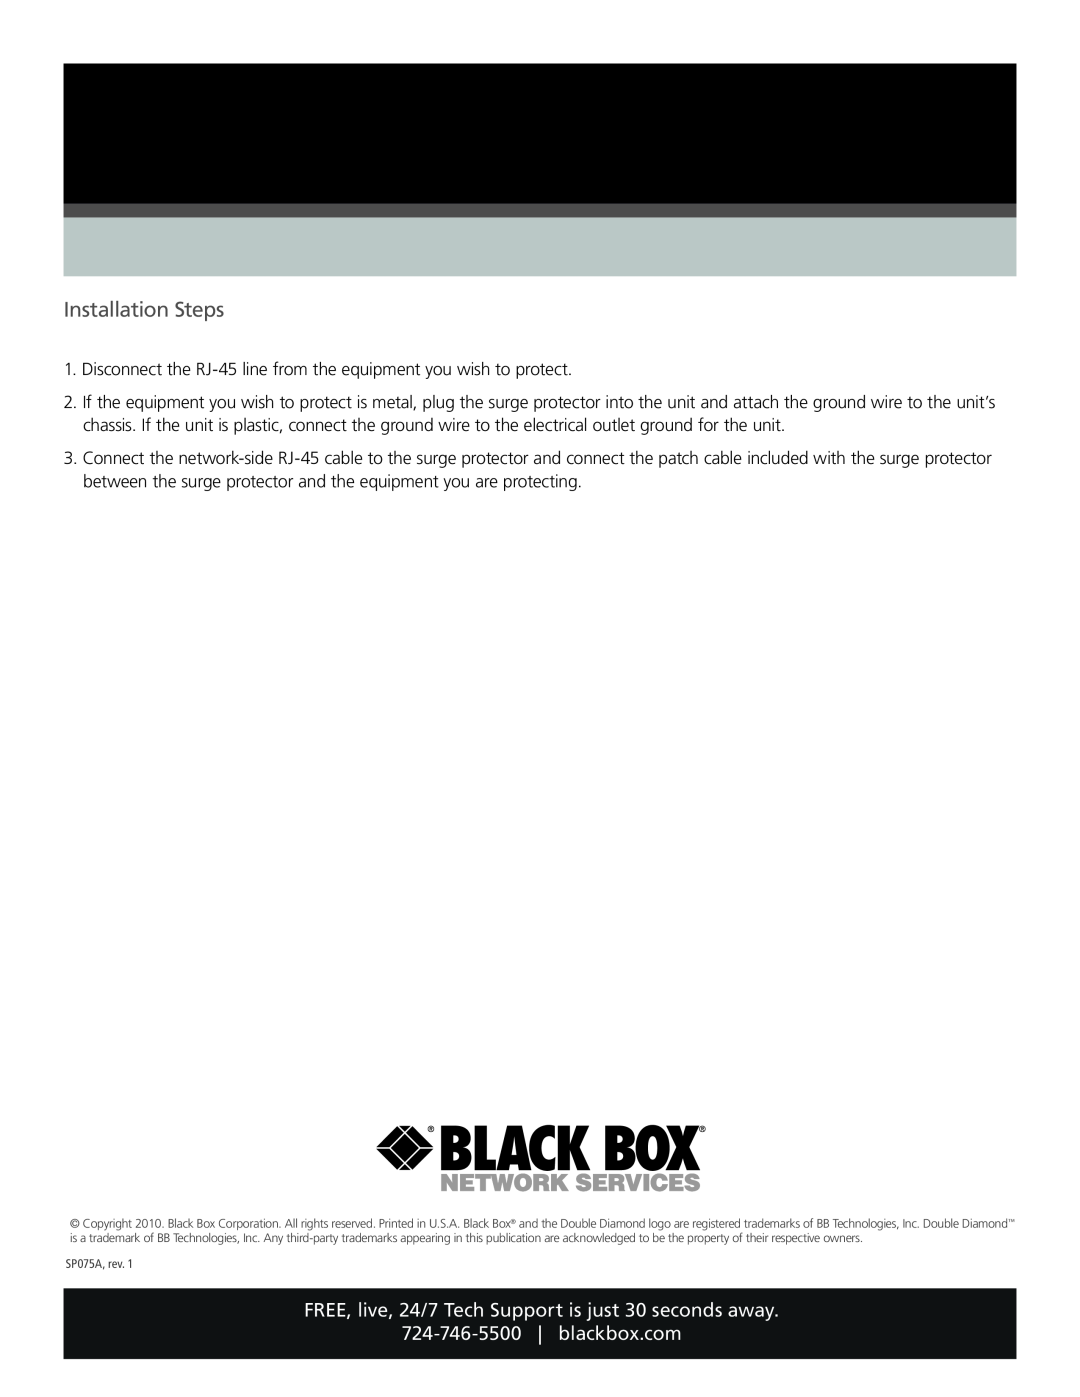 Black Box SP075A specifications Installation Steps, FREE, live, 24/7 Tech Support is just 30 seconds away 